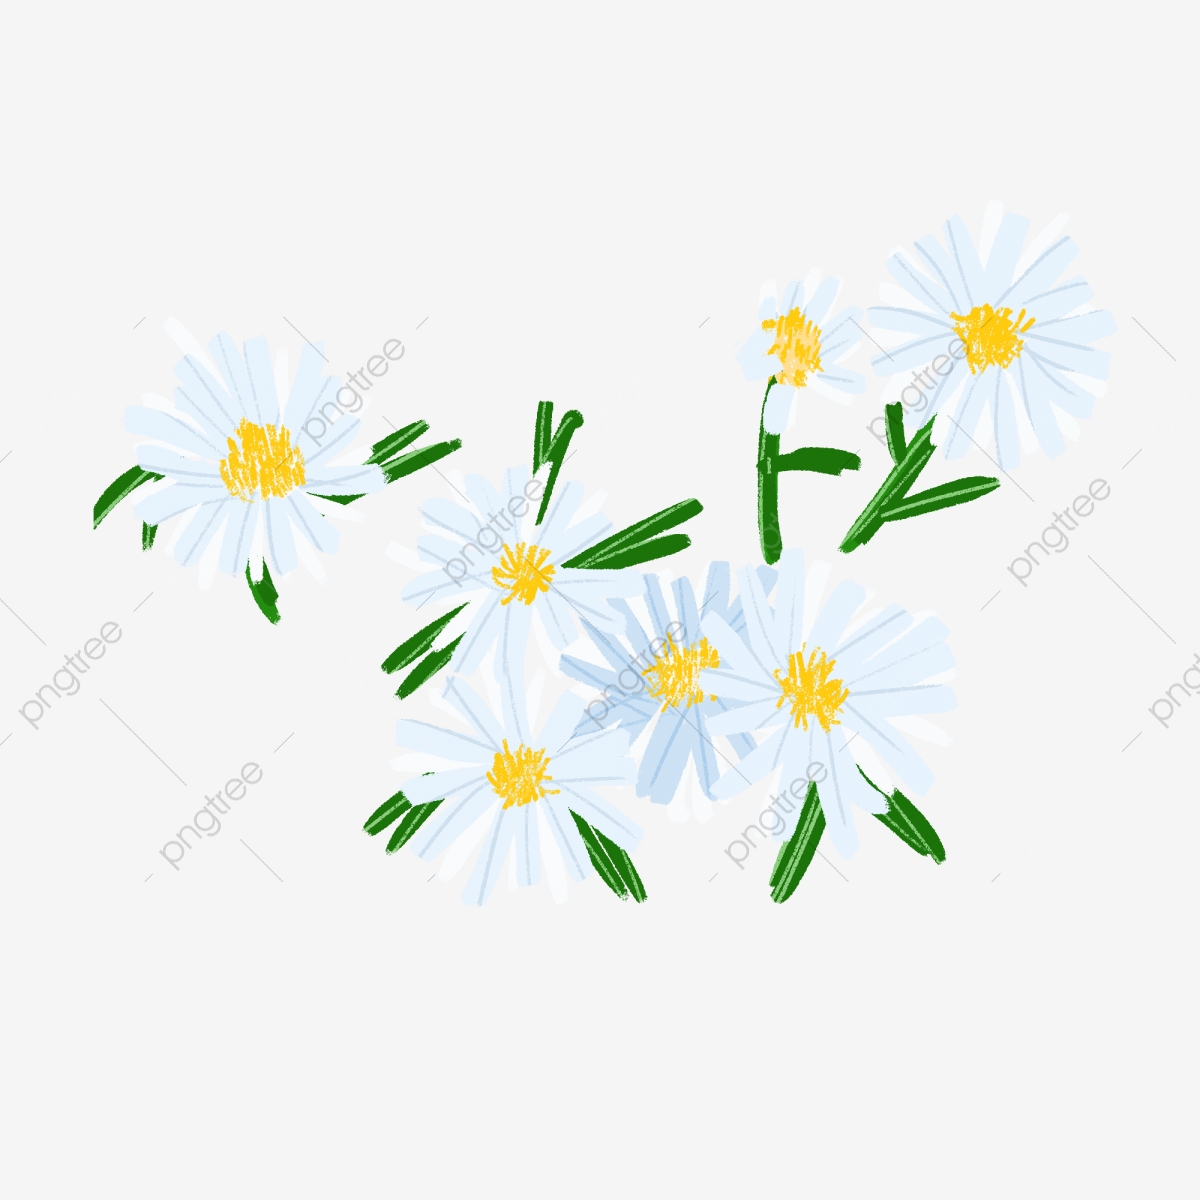 Hand painted fresh and. Daisies clipart small daisy